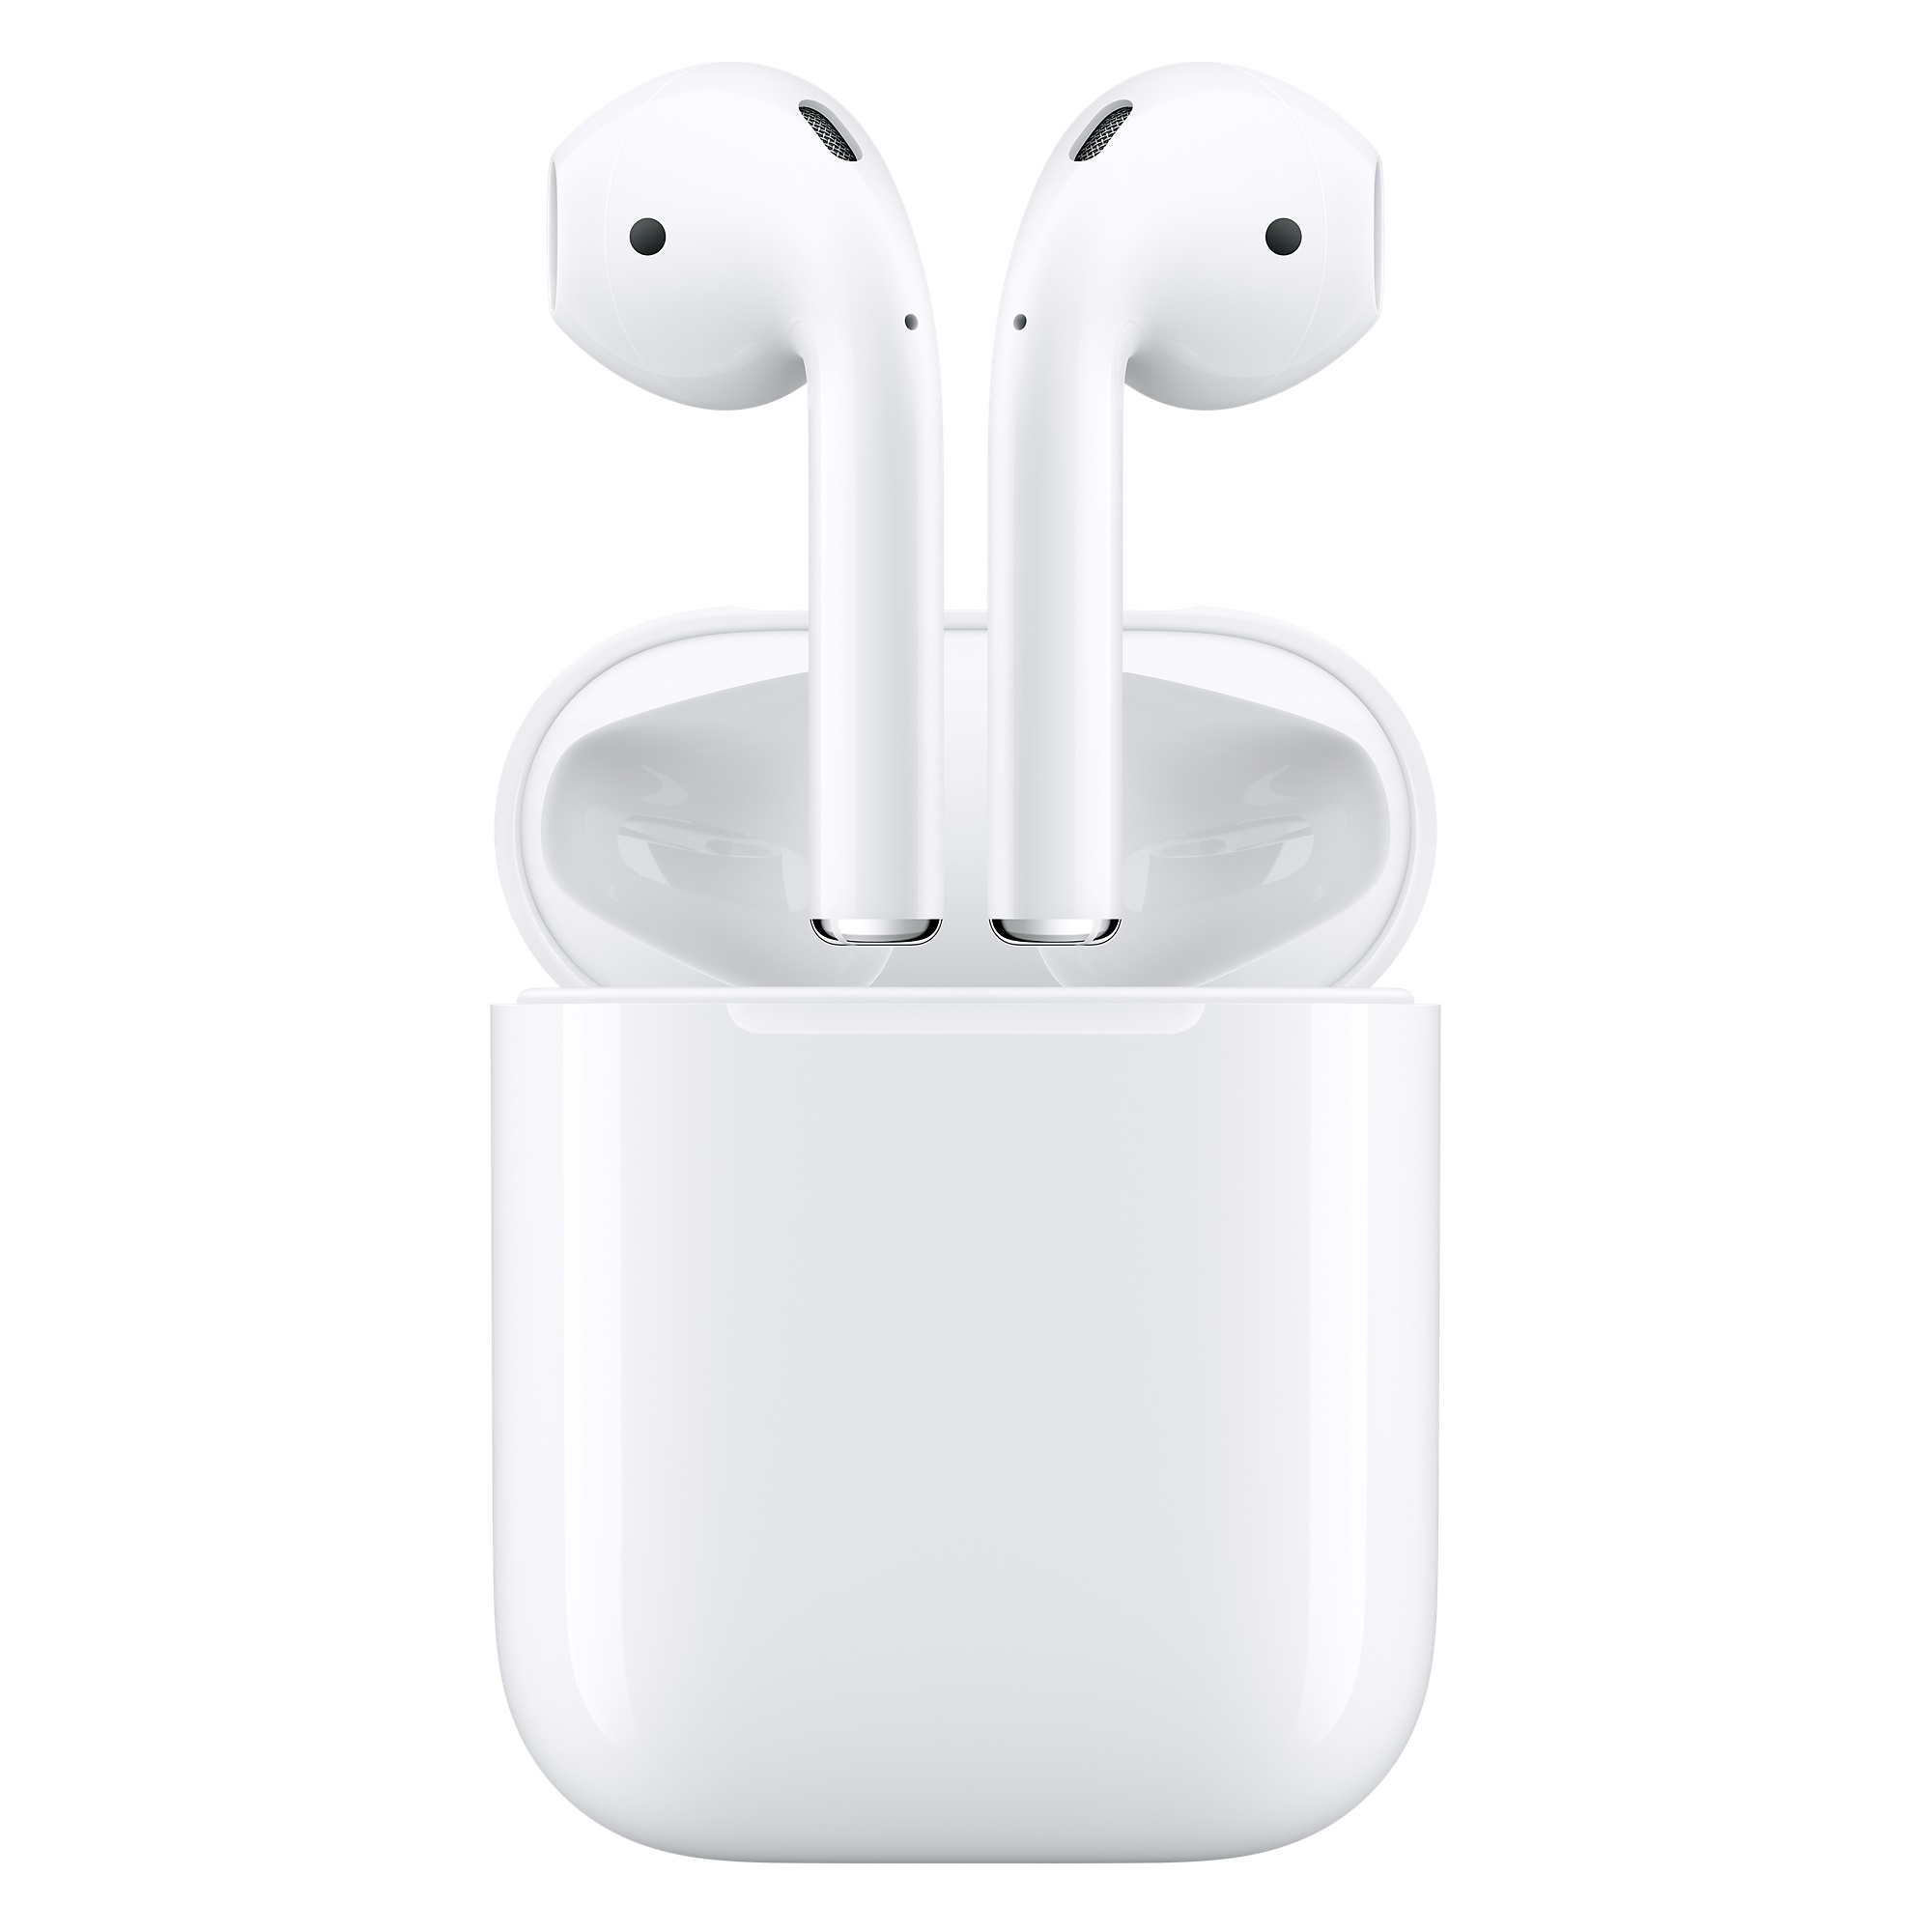 SP750 airpods